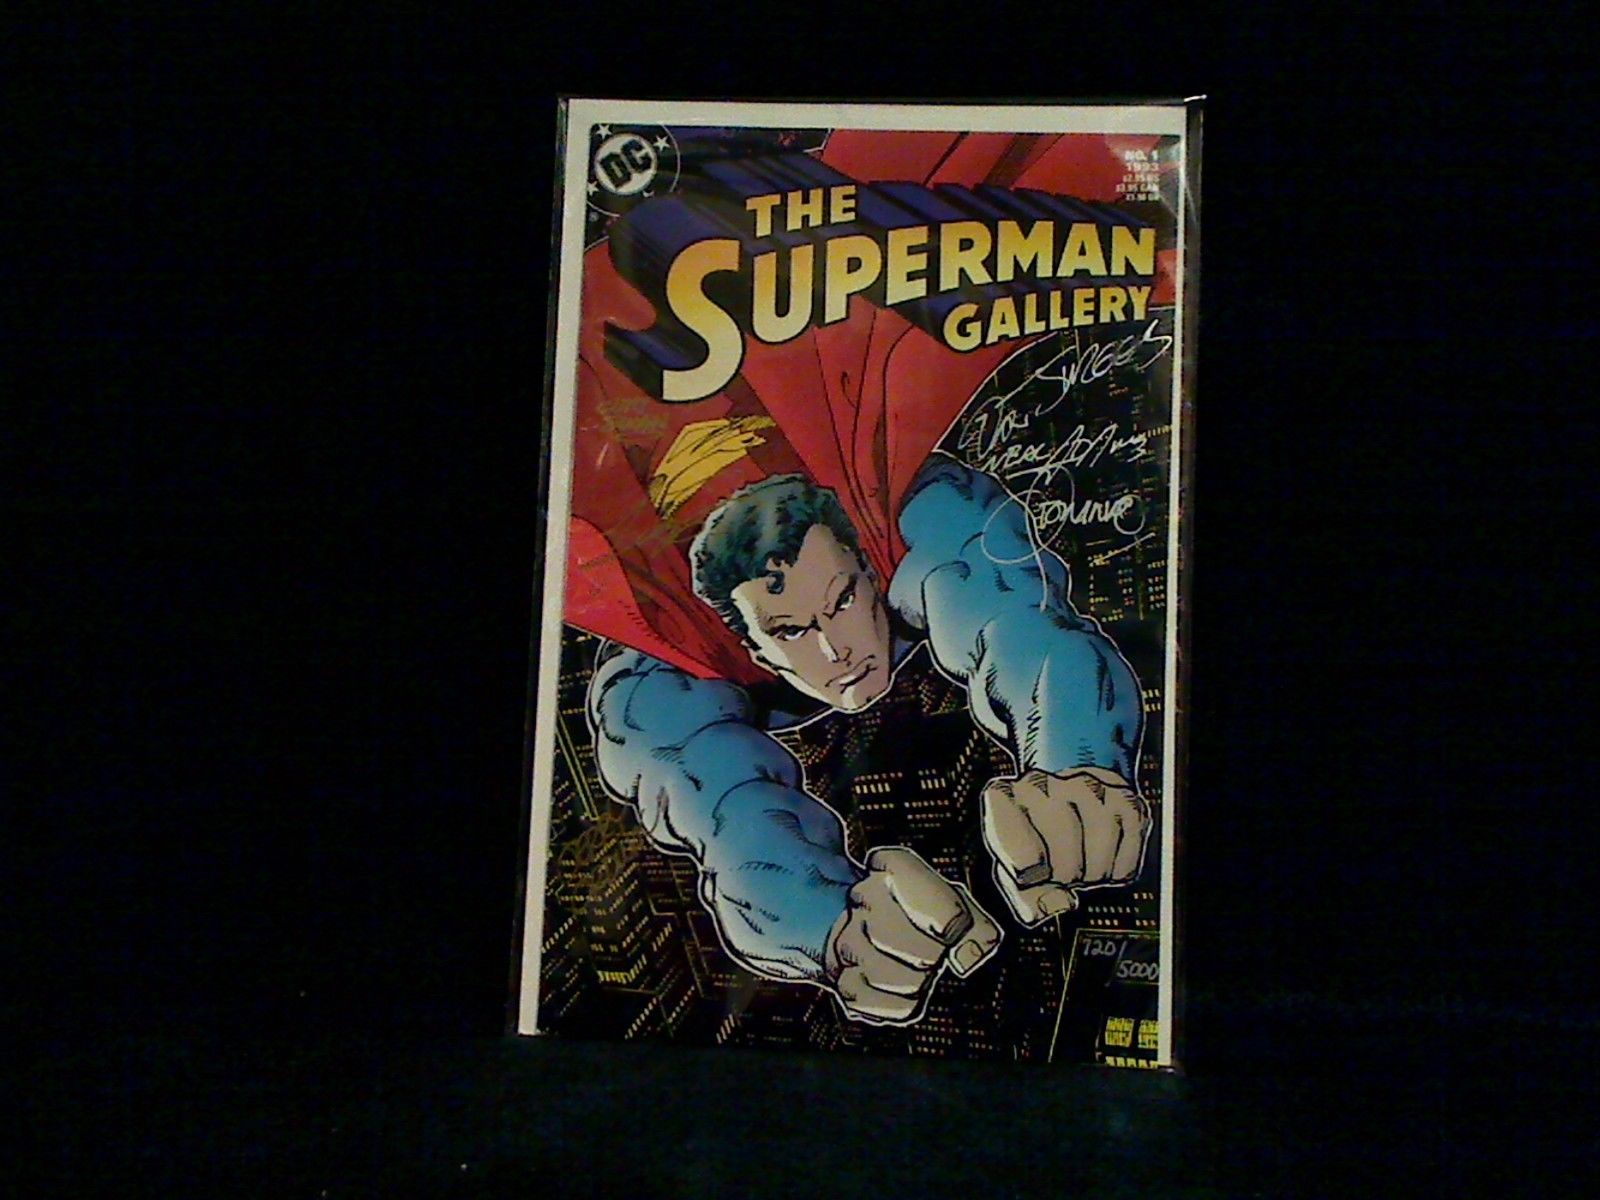 DC SUPERMAN GALLERY # 1 SIGNED BY ADAMS, STERANKO, PEREZ, ORDWAY & MORE 720/5000